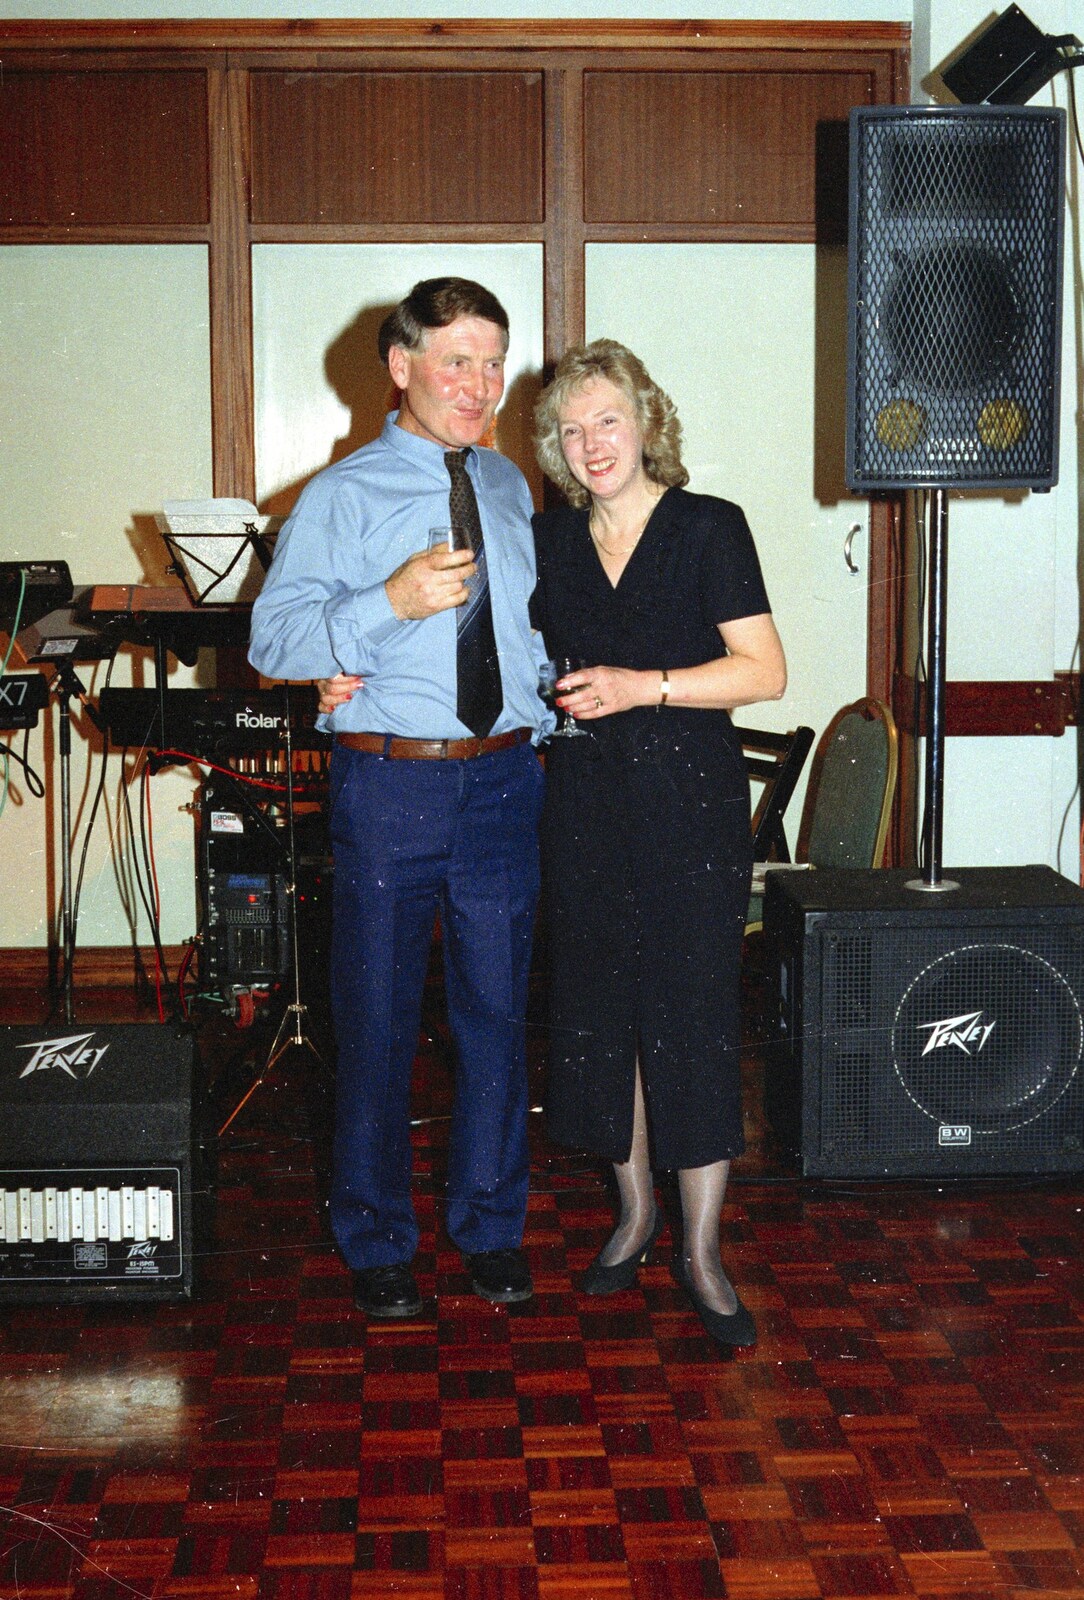 Bernie and Jean from Bernie's Anniversary and Charlie's Wedding, Palgrave and Oakley, Suffolk - 19th July 1994